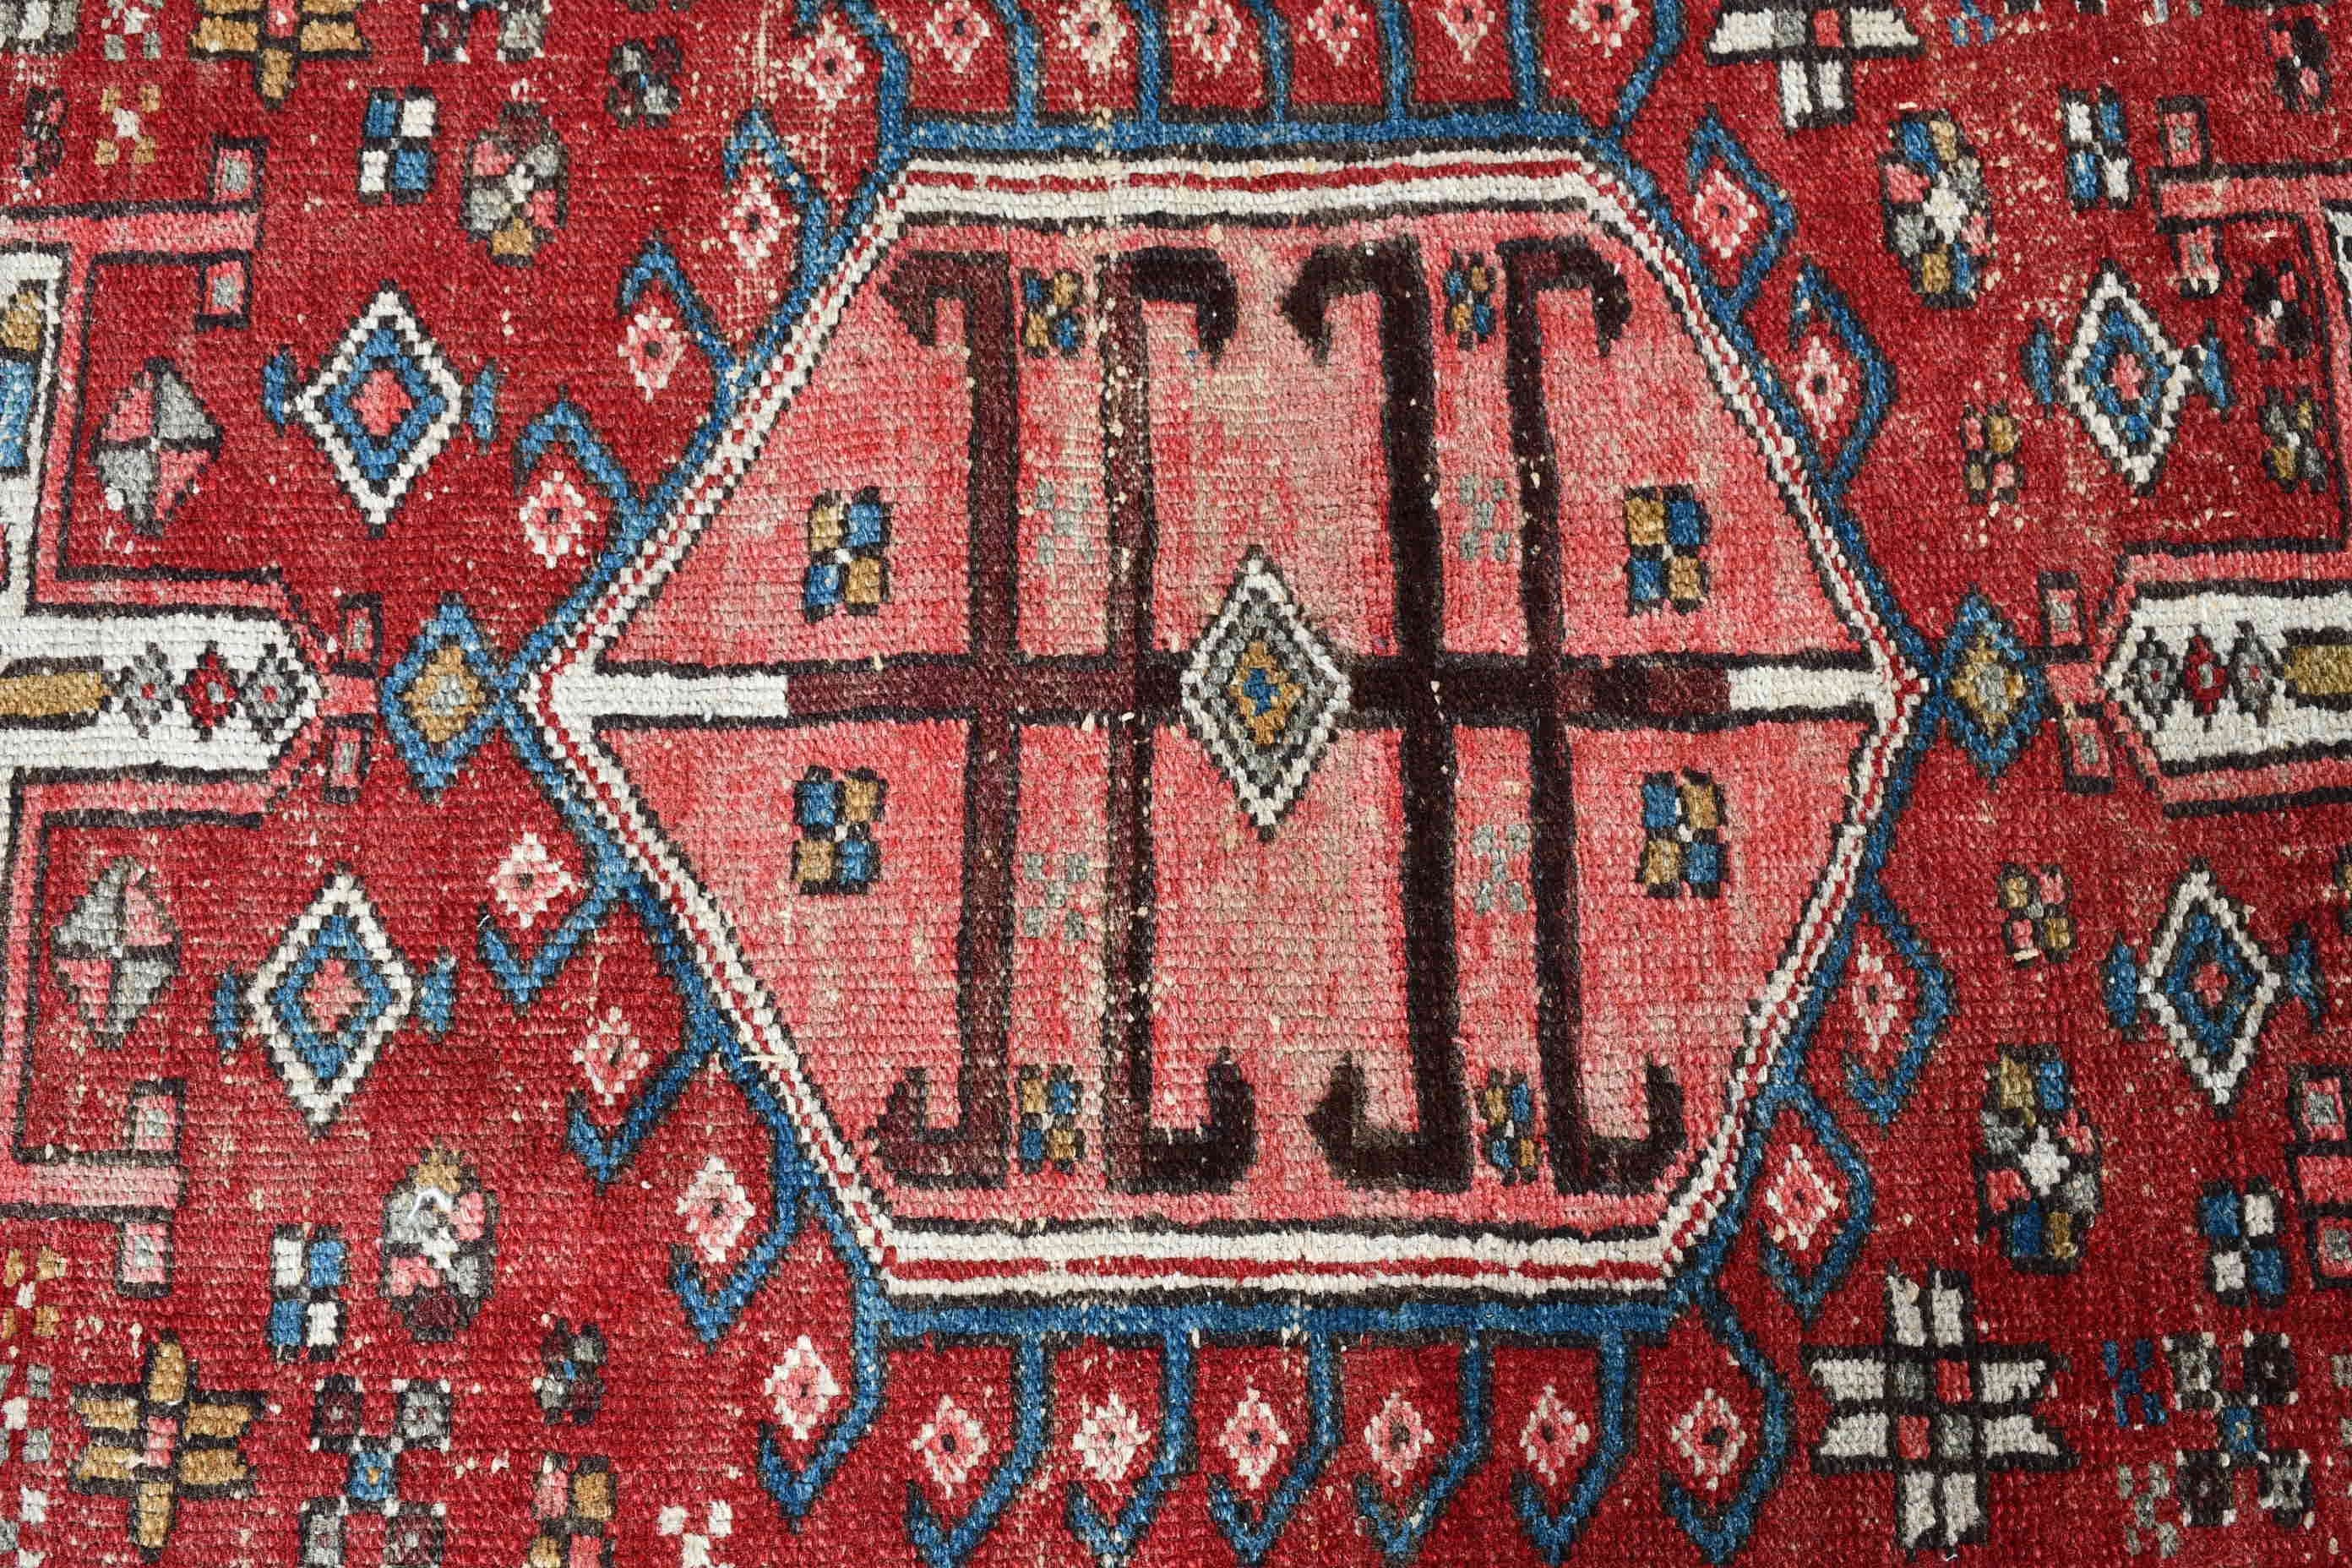 Rugs for Nursery, Vintage Rug, Turkish Rug, Nursery Rug, Cool Rug, Red Moroccan Rugs, Kitchen Rug, Home Decor Rug, 3.3x5.8 ft Accent Rugs